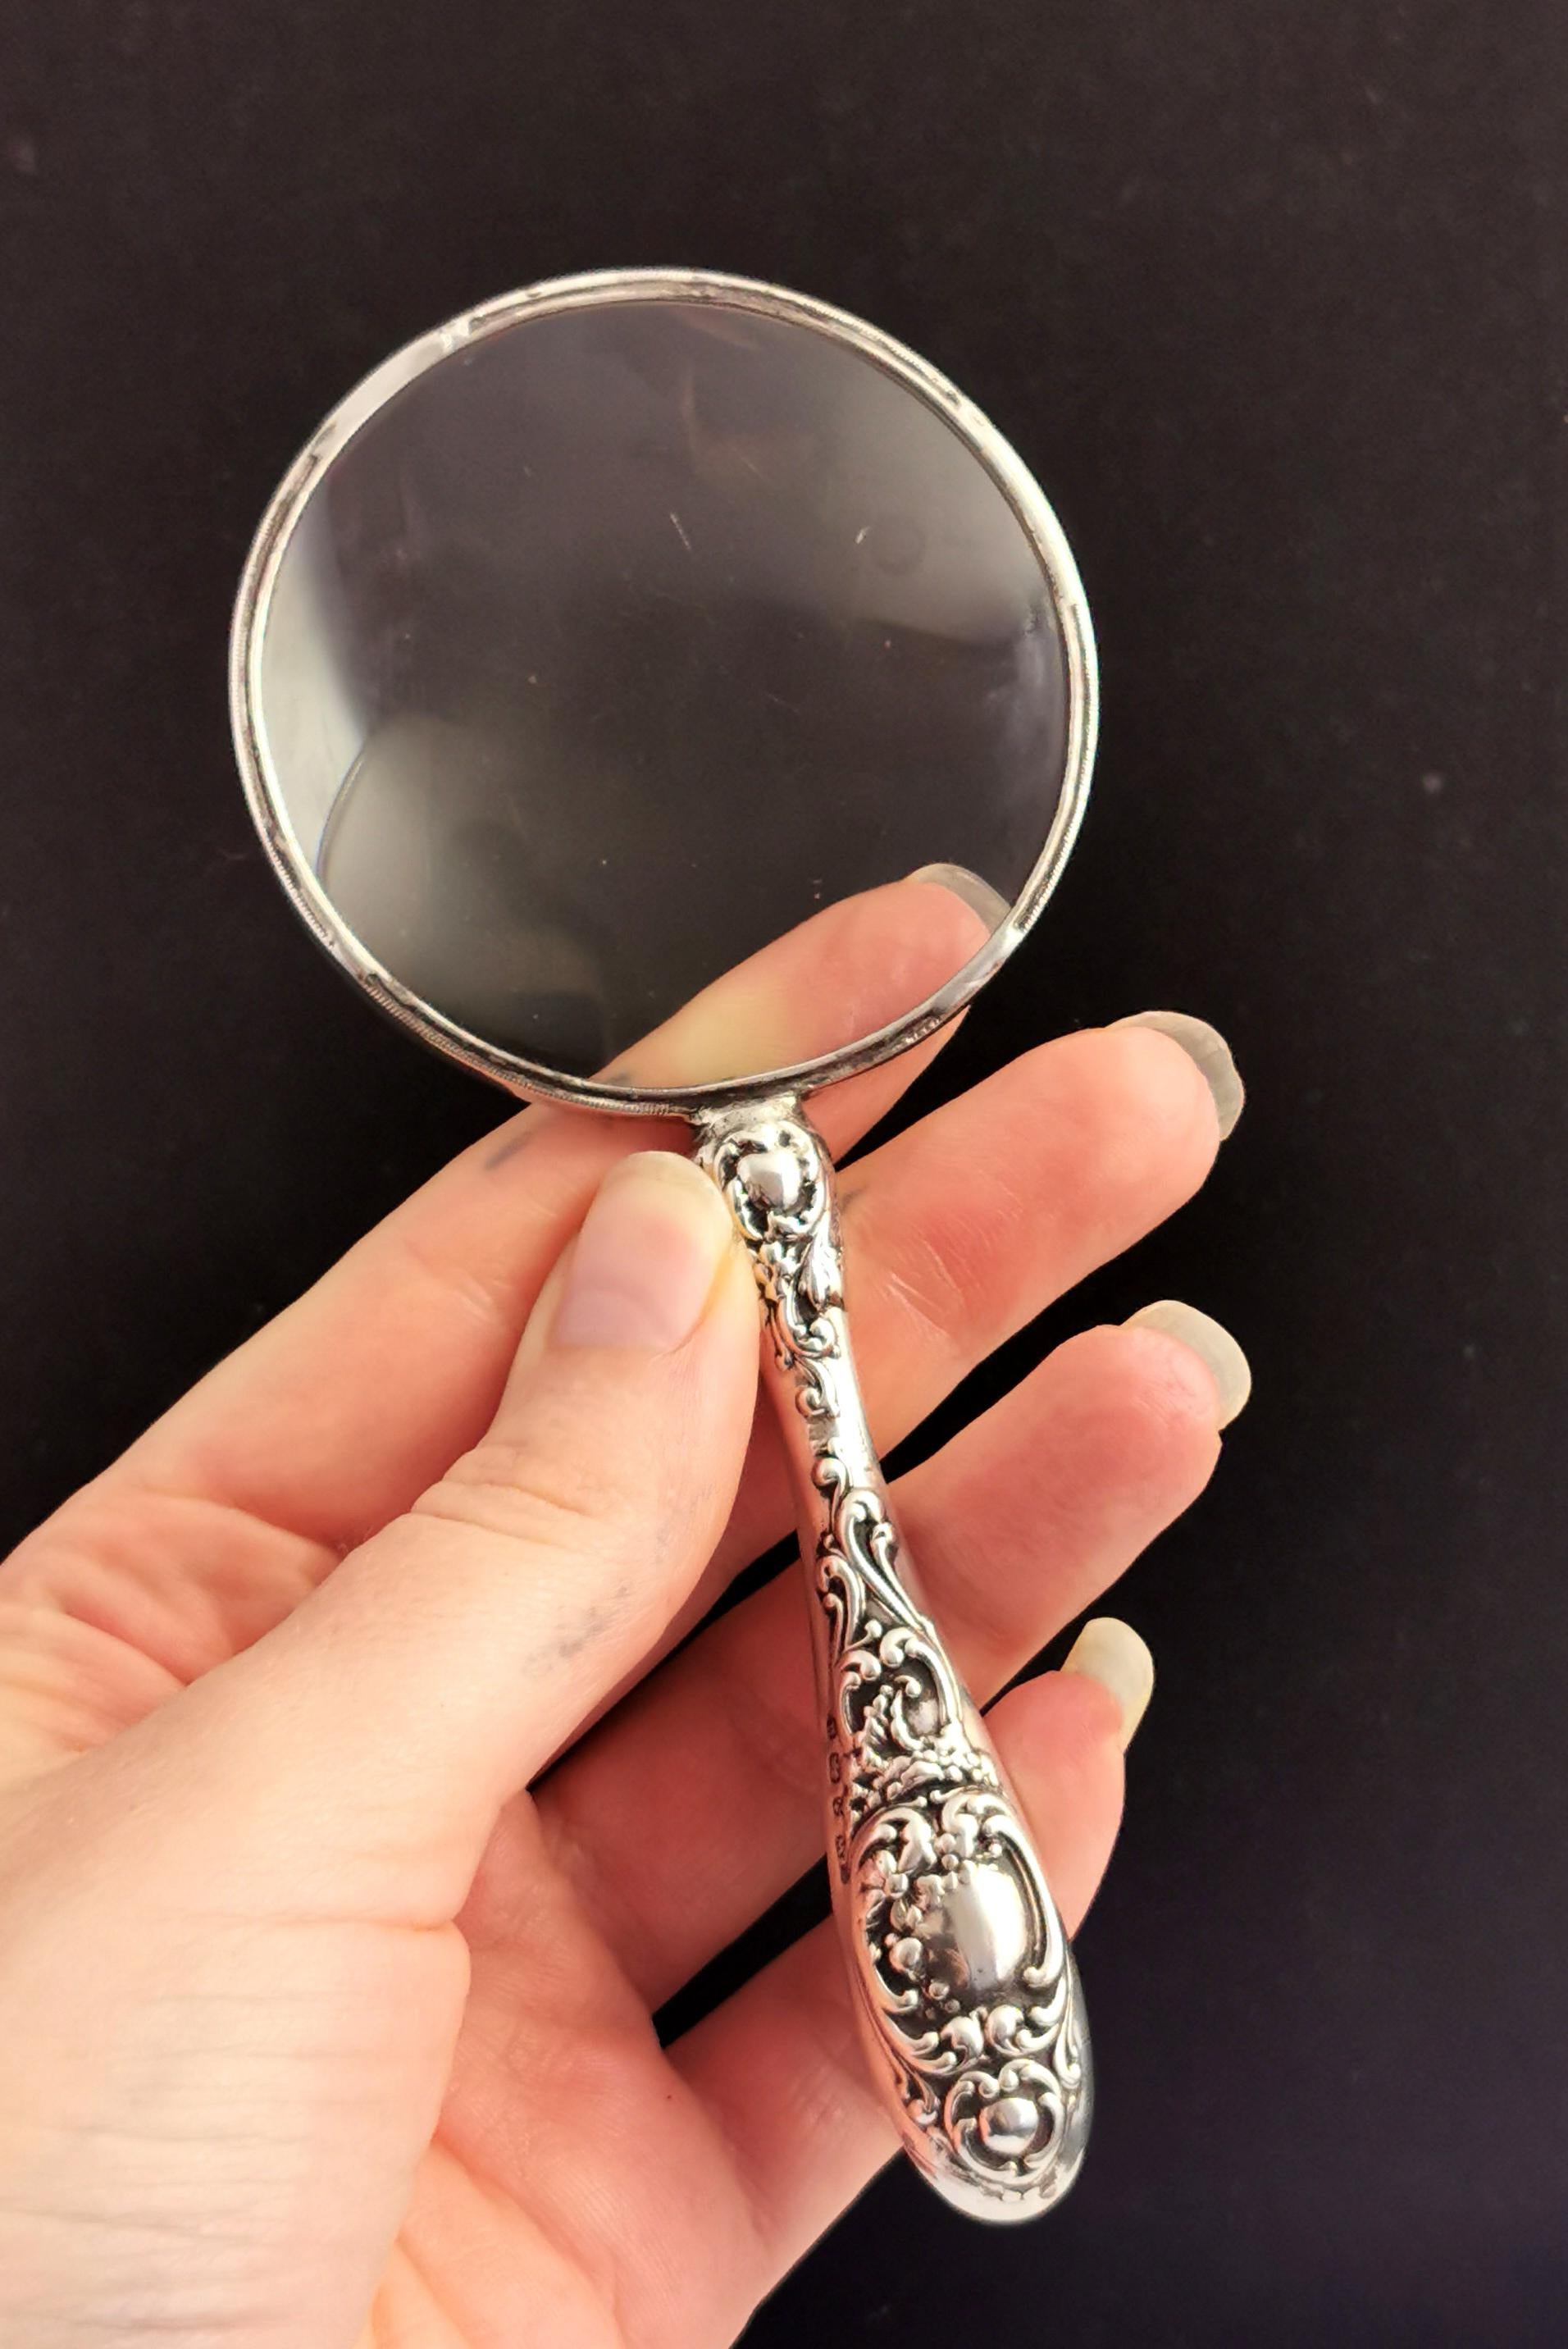 Late Victorian Antique Victorian Sterling Silver Magnifying Glass, Repousse